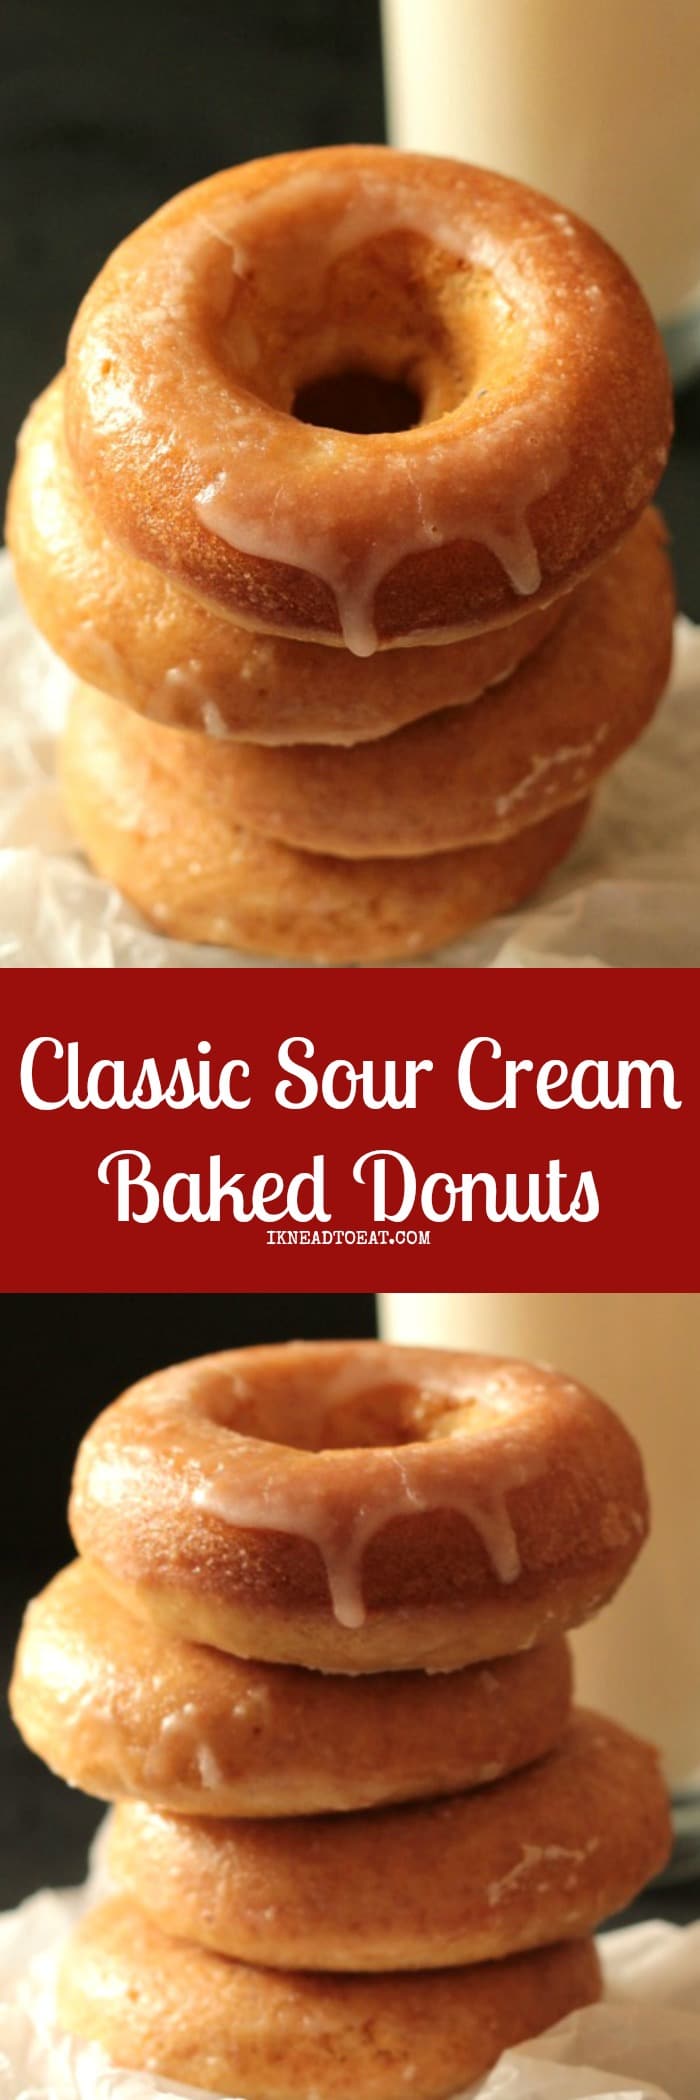 Classic Sour Cream Baked Donuts